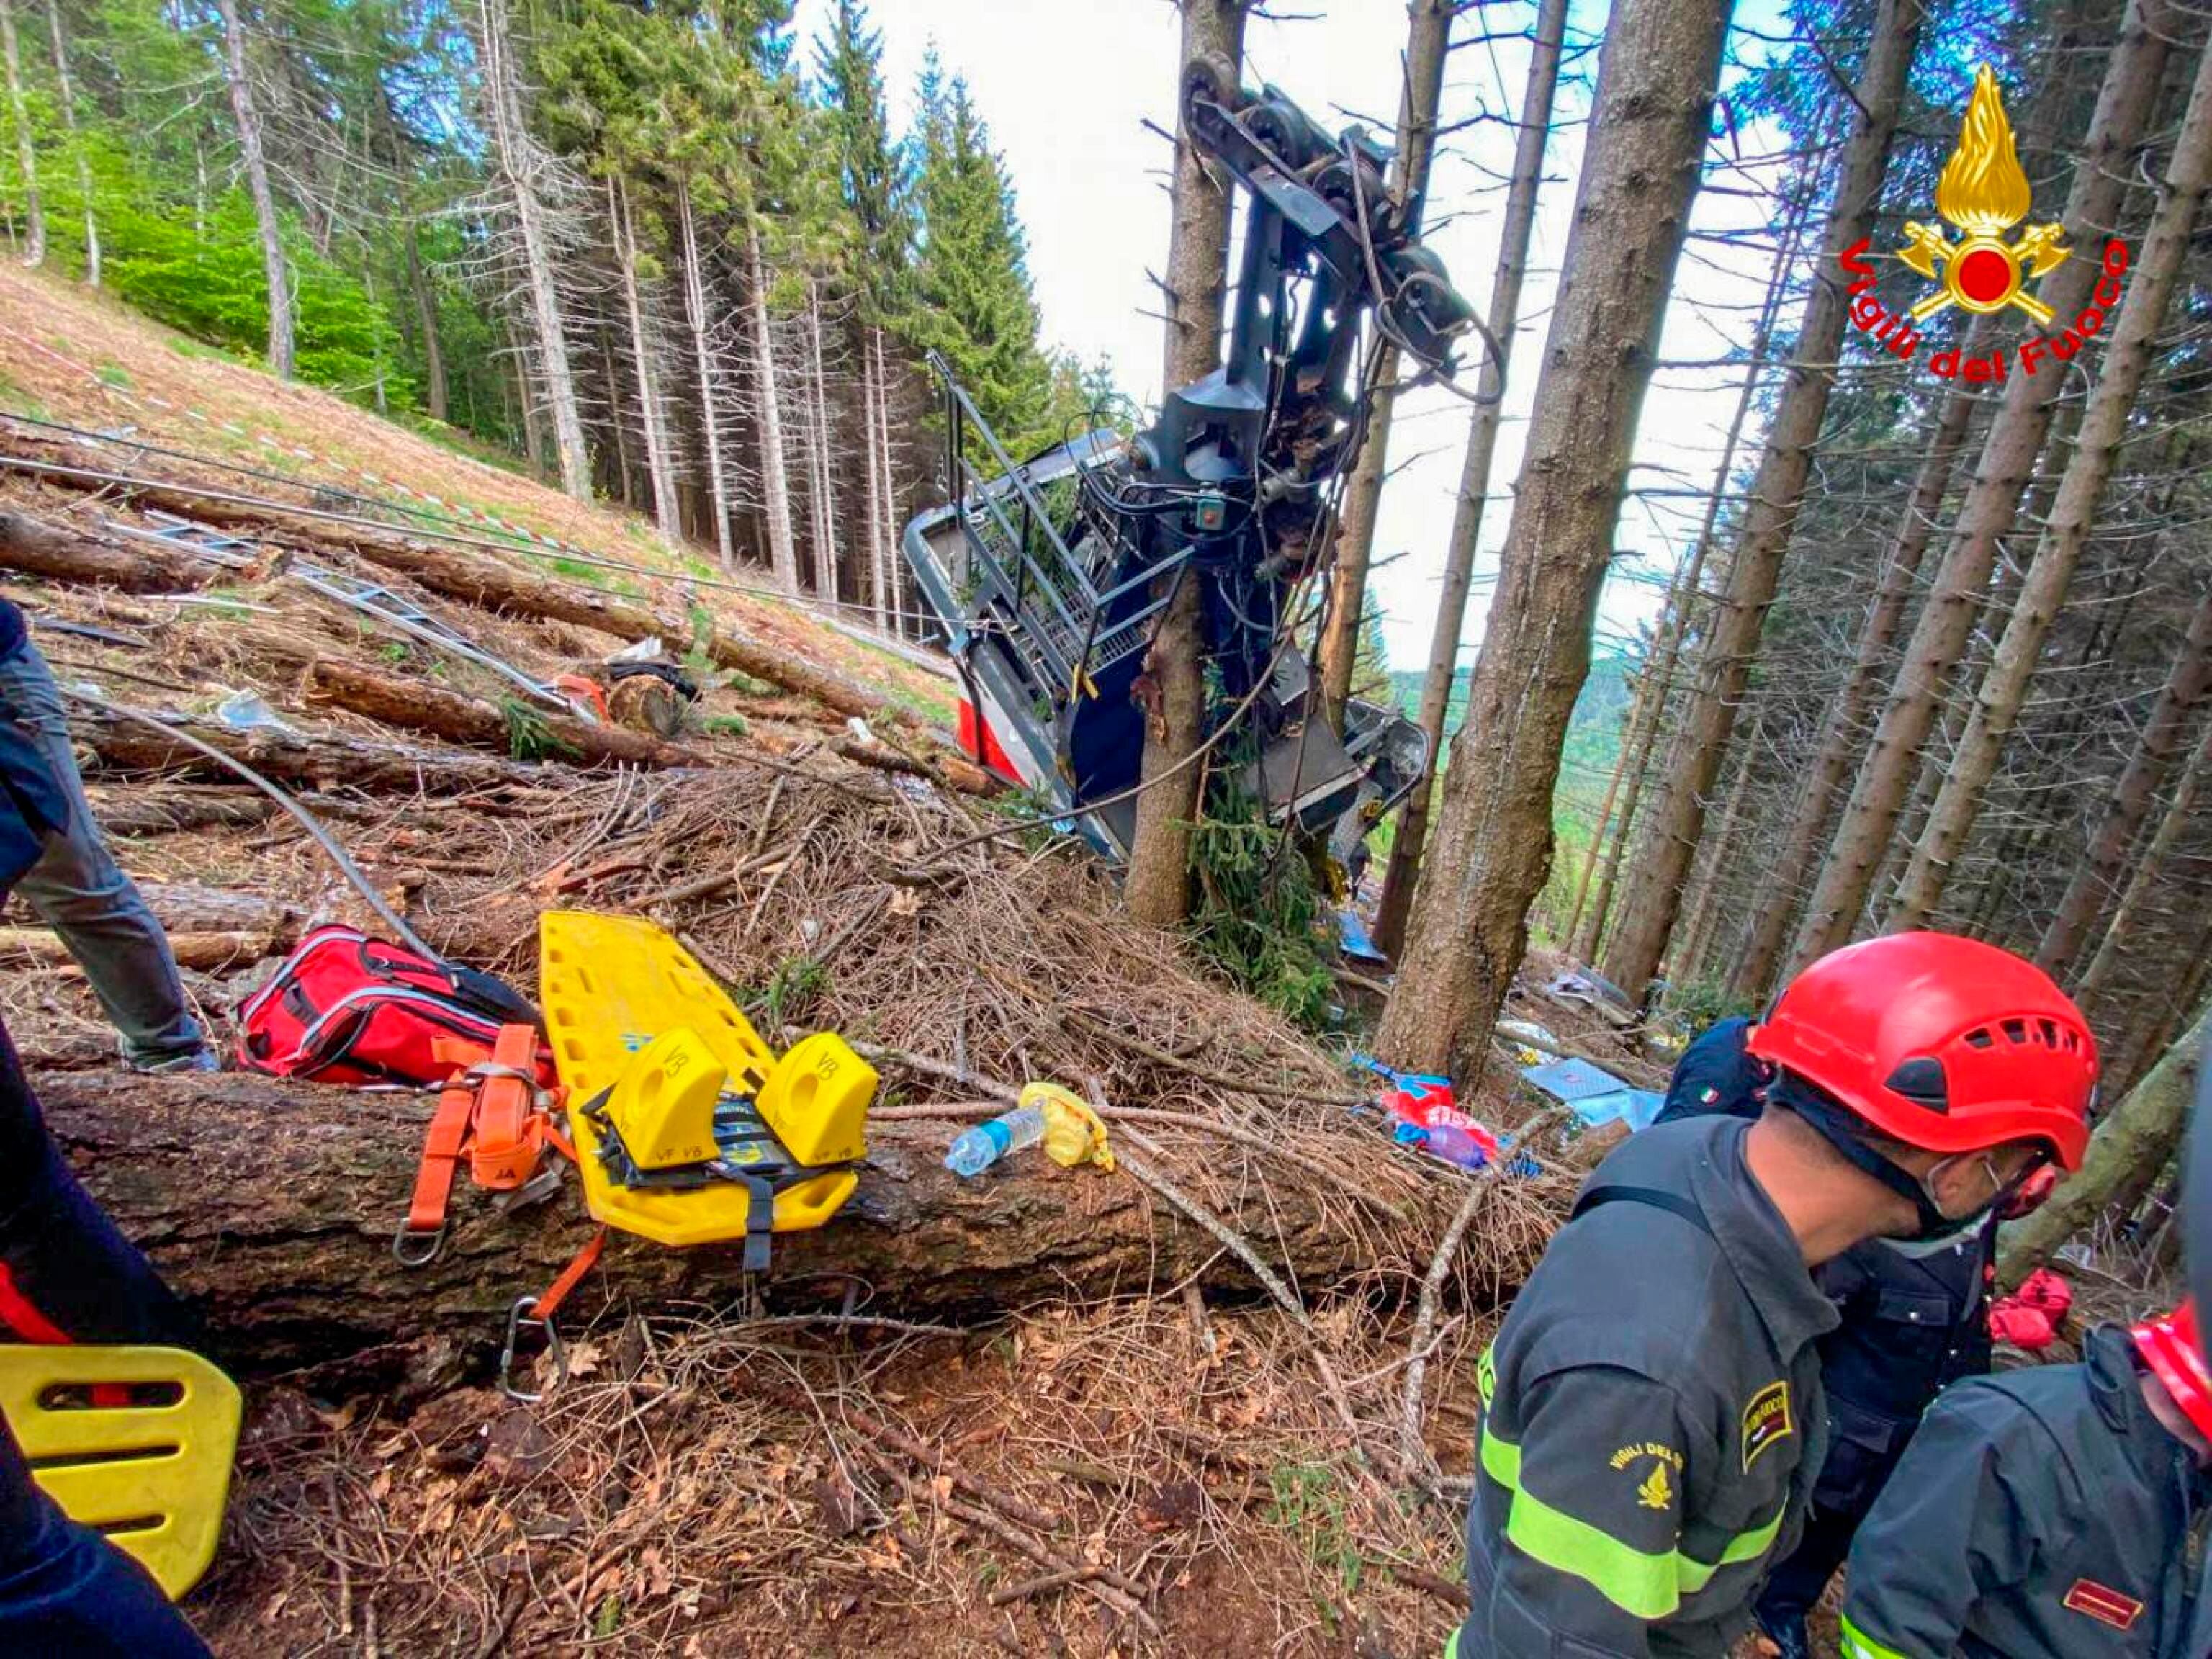 Stresa (Italy), 23/05/2021.- A handout photo made available by Italian Fire and Rescue Service shows Rescuers at work at the area of the cable car accident, near Lake Maggiore, northern Italy, 23 May 2021. The cable car that connects Stresa with Mottarone has crashed, claiming 14 lives, according to the latest toll. The accident has been caused by the failure of a rope, in the highest part of the route which, starting from Lake Maggiore reaches an altitude of 1,491 meters. (Incendio, Italia) EFE/EPA/ITALIAN FIRE AND RESCUE SERVICE / HANDOUT HANDOUT EDITORIAL USE ONLY/NO SALES
